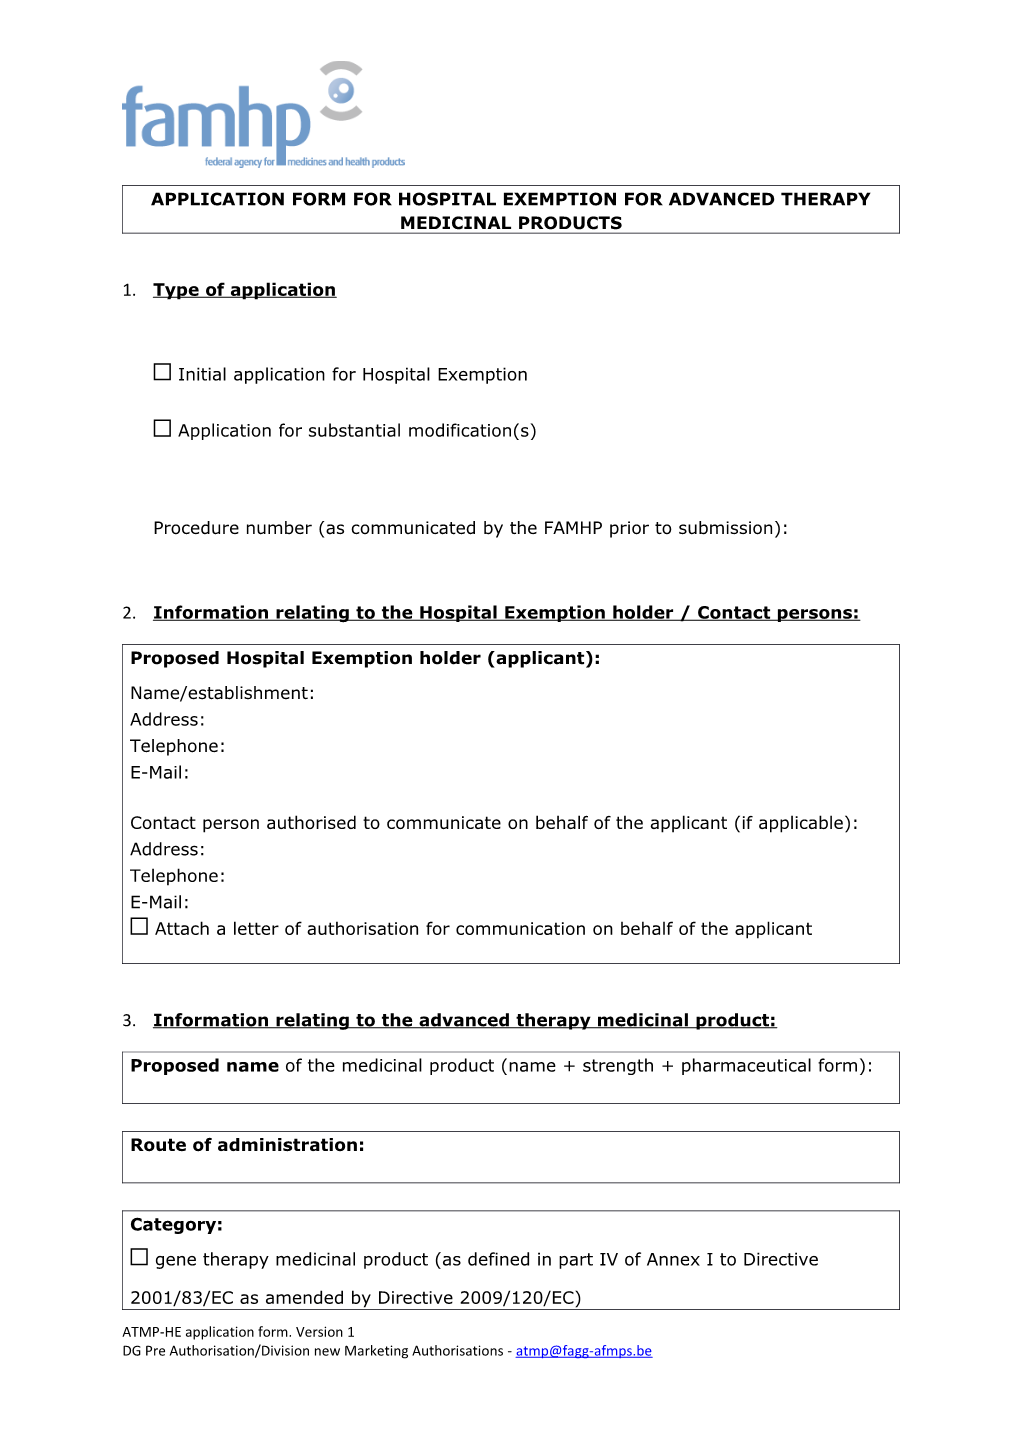 Application Form for Hospital Exemption for Advanced Therapy Medicinal Products